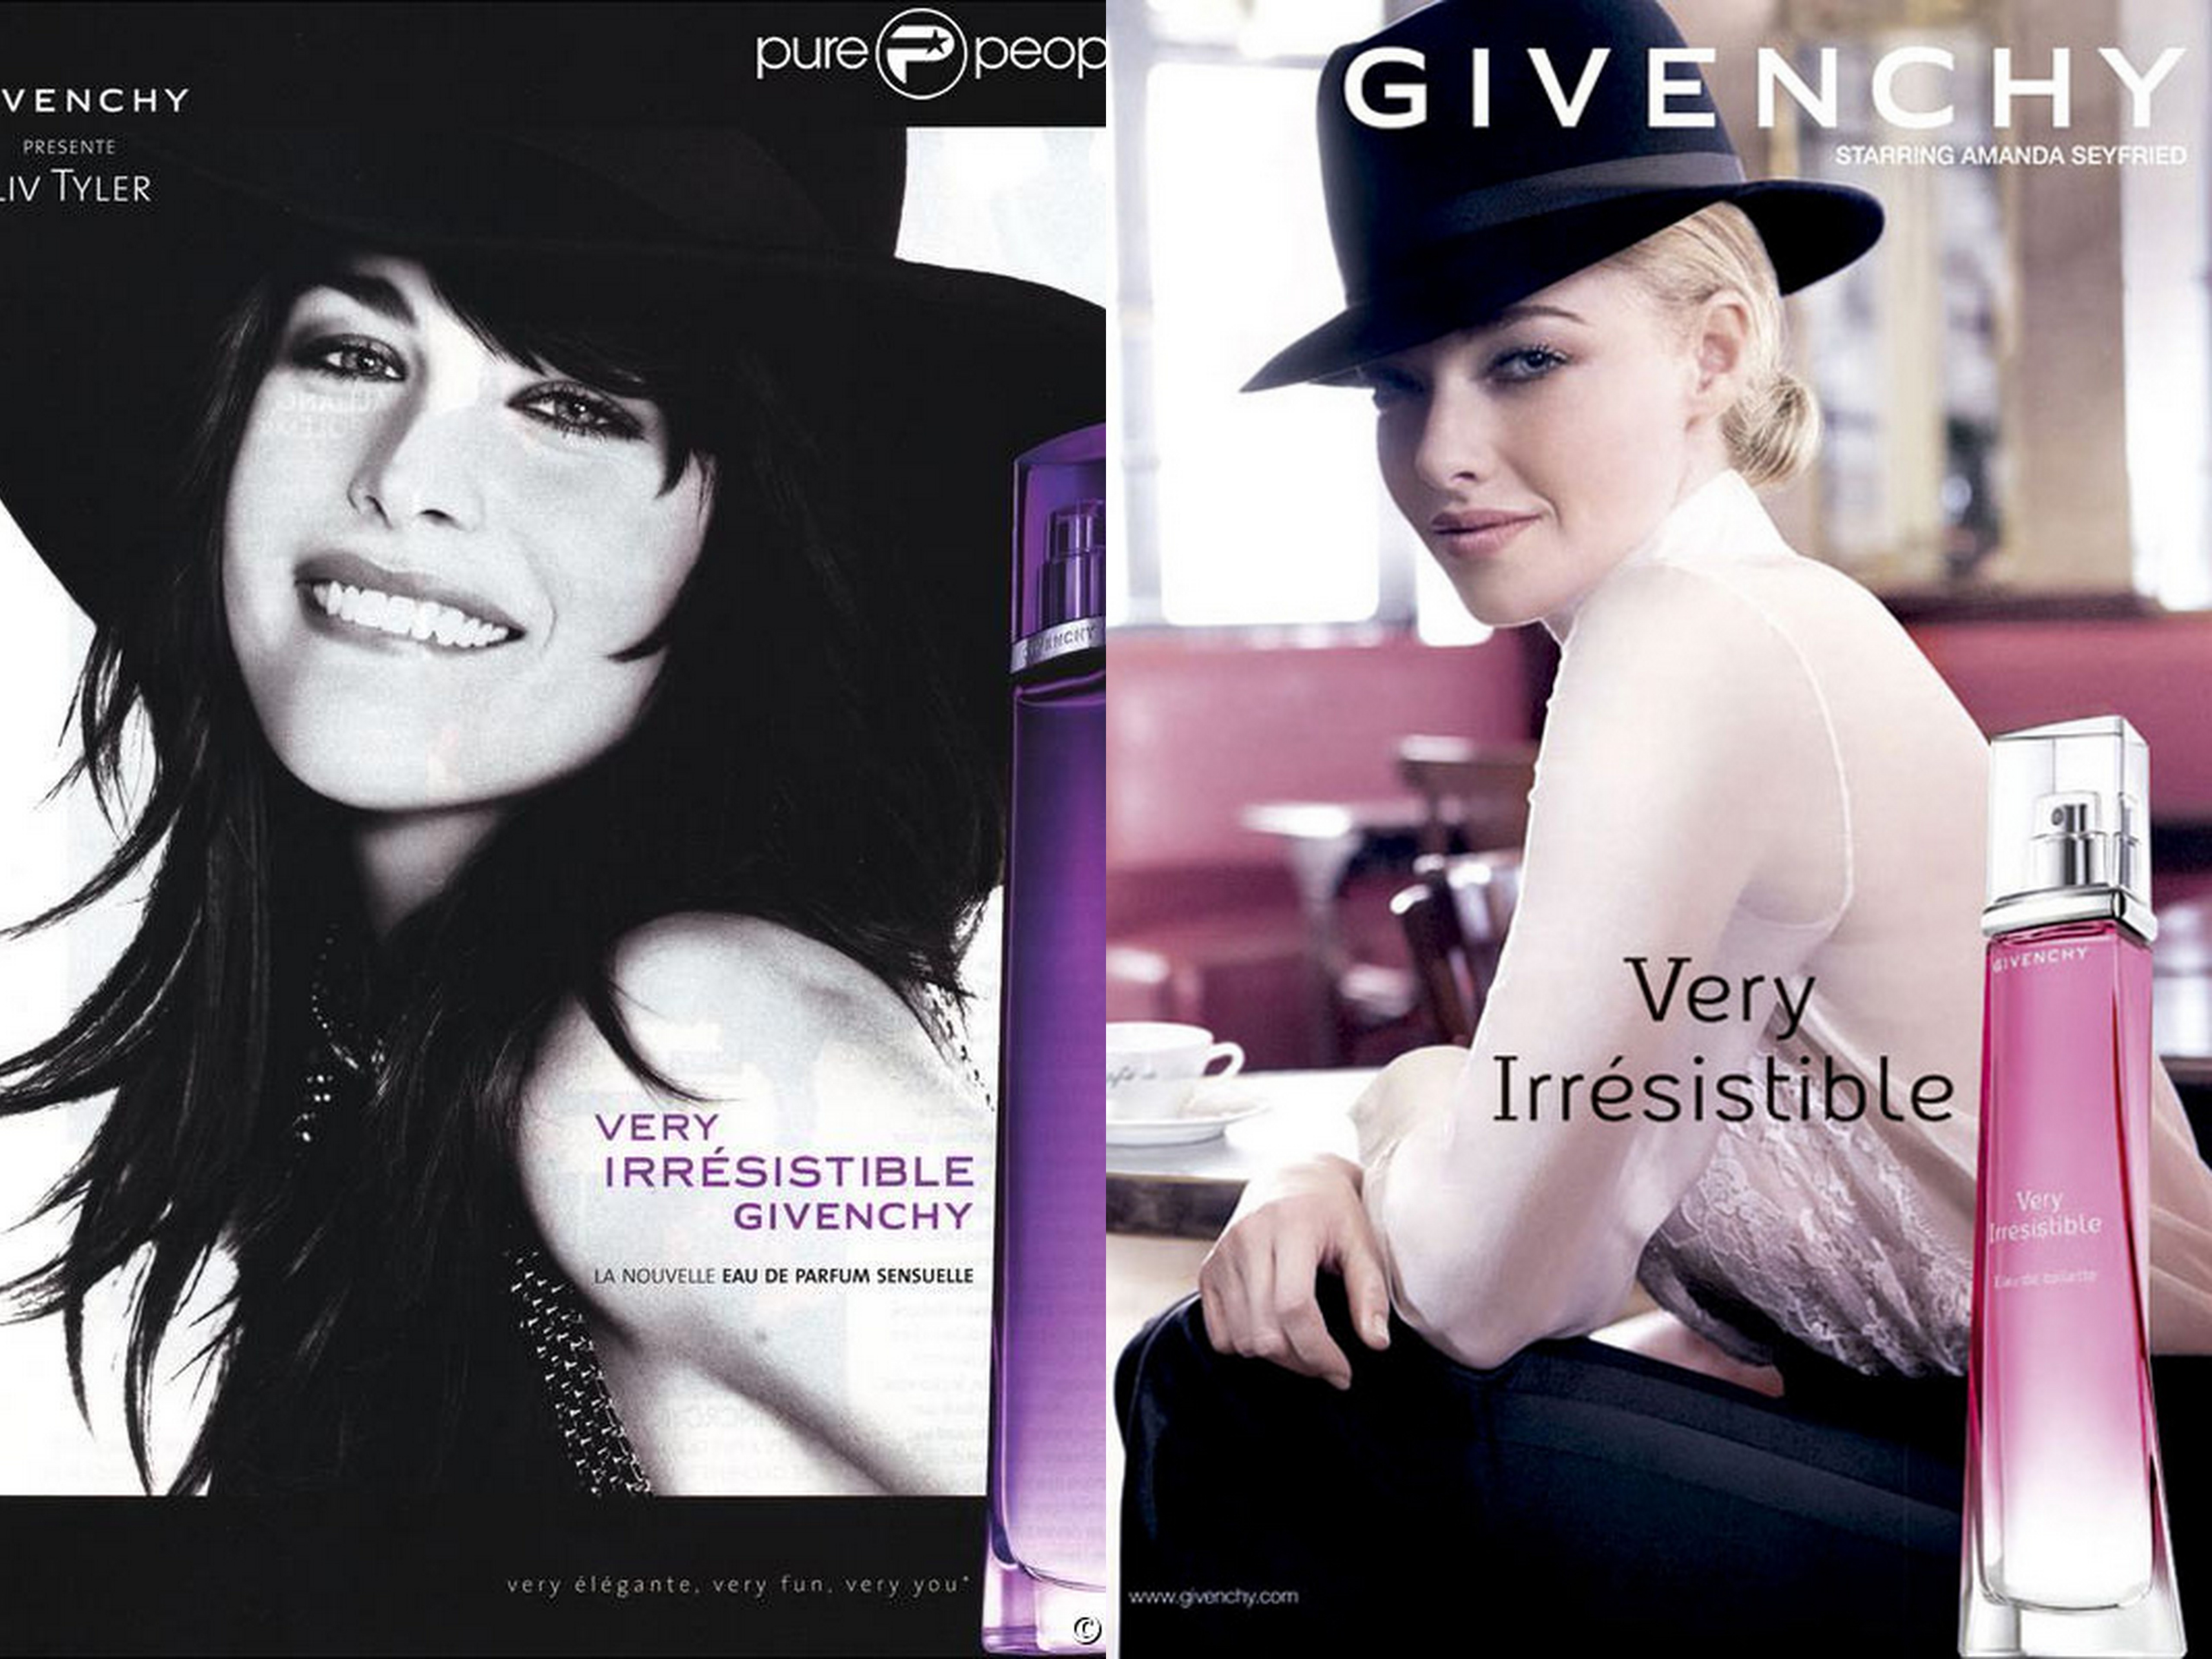 liv tyler very irresistible givenchy